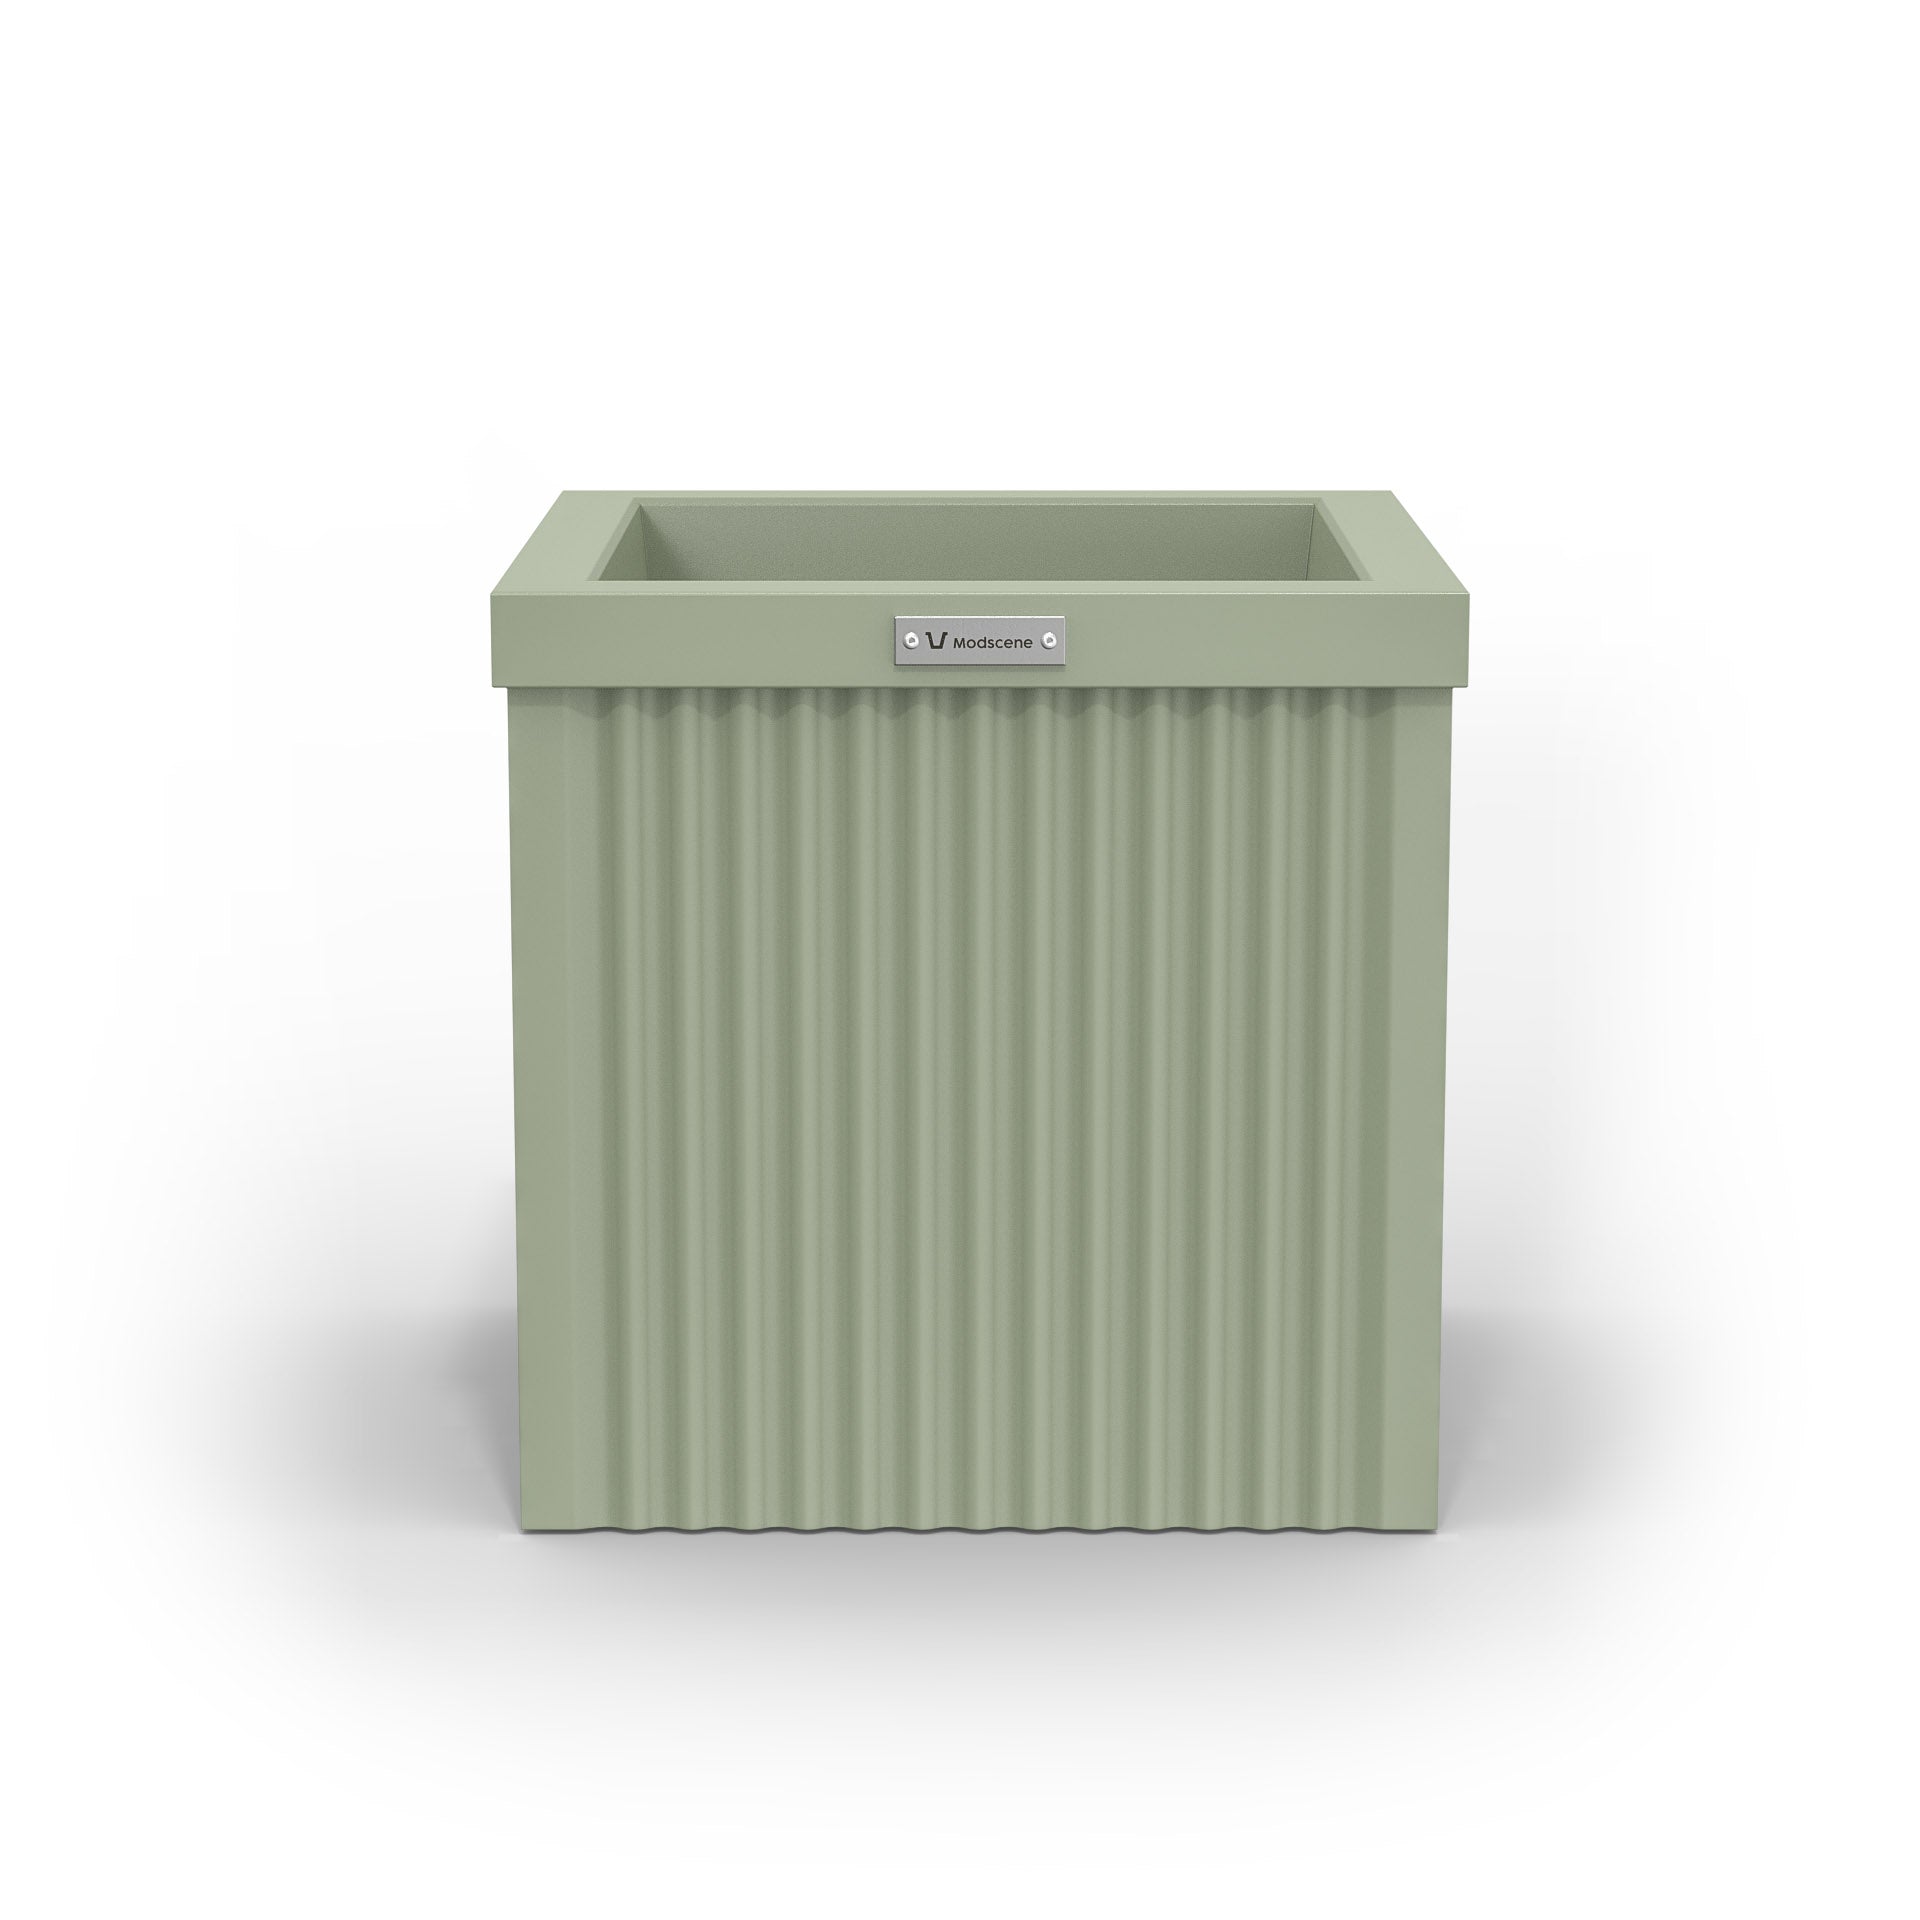 A corrugated square planter pot. The pot planter is moss green in colour.